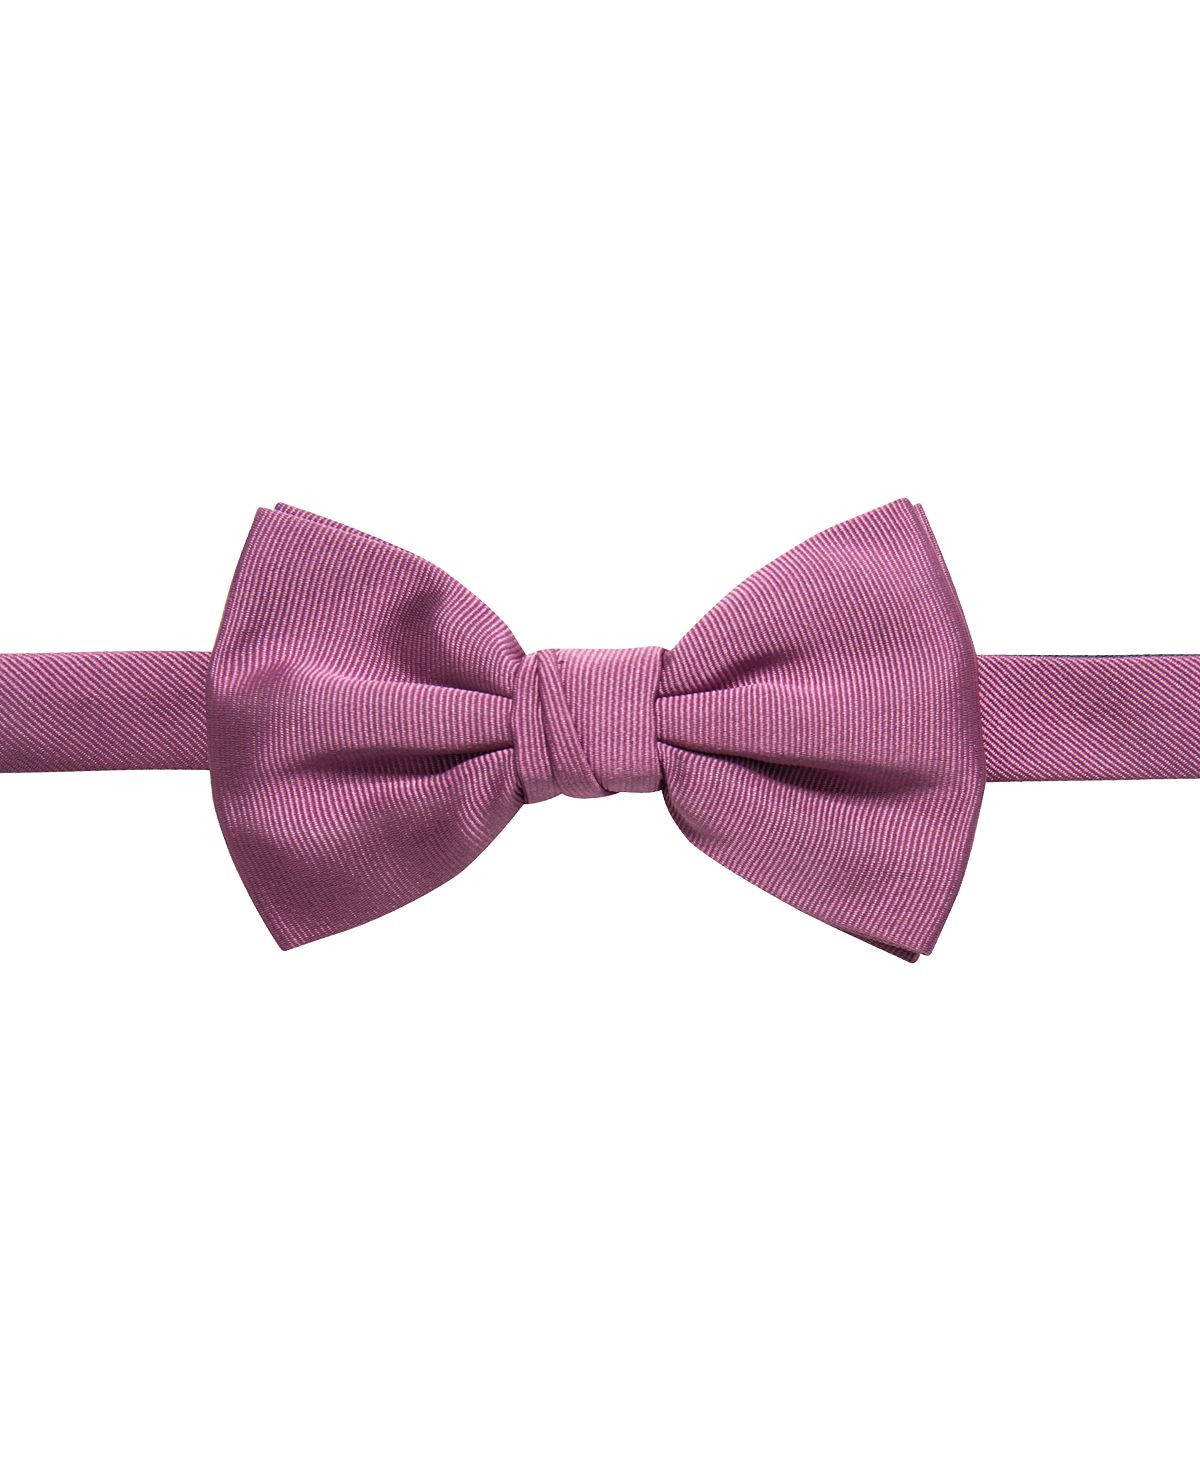 Ryan Seacrest Distinction Event Solid Pre-tied Bow Tie Berry